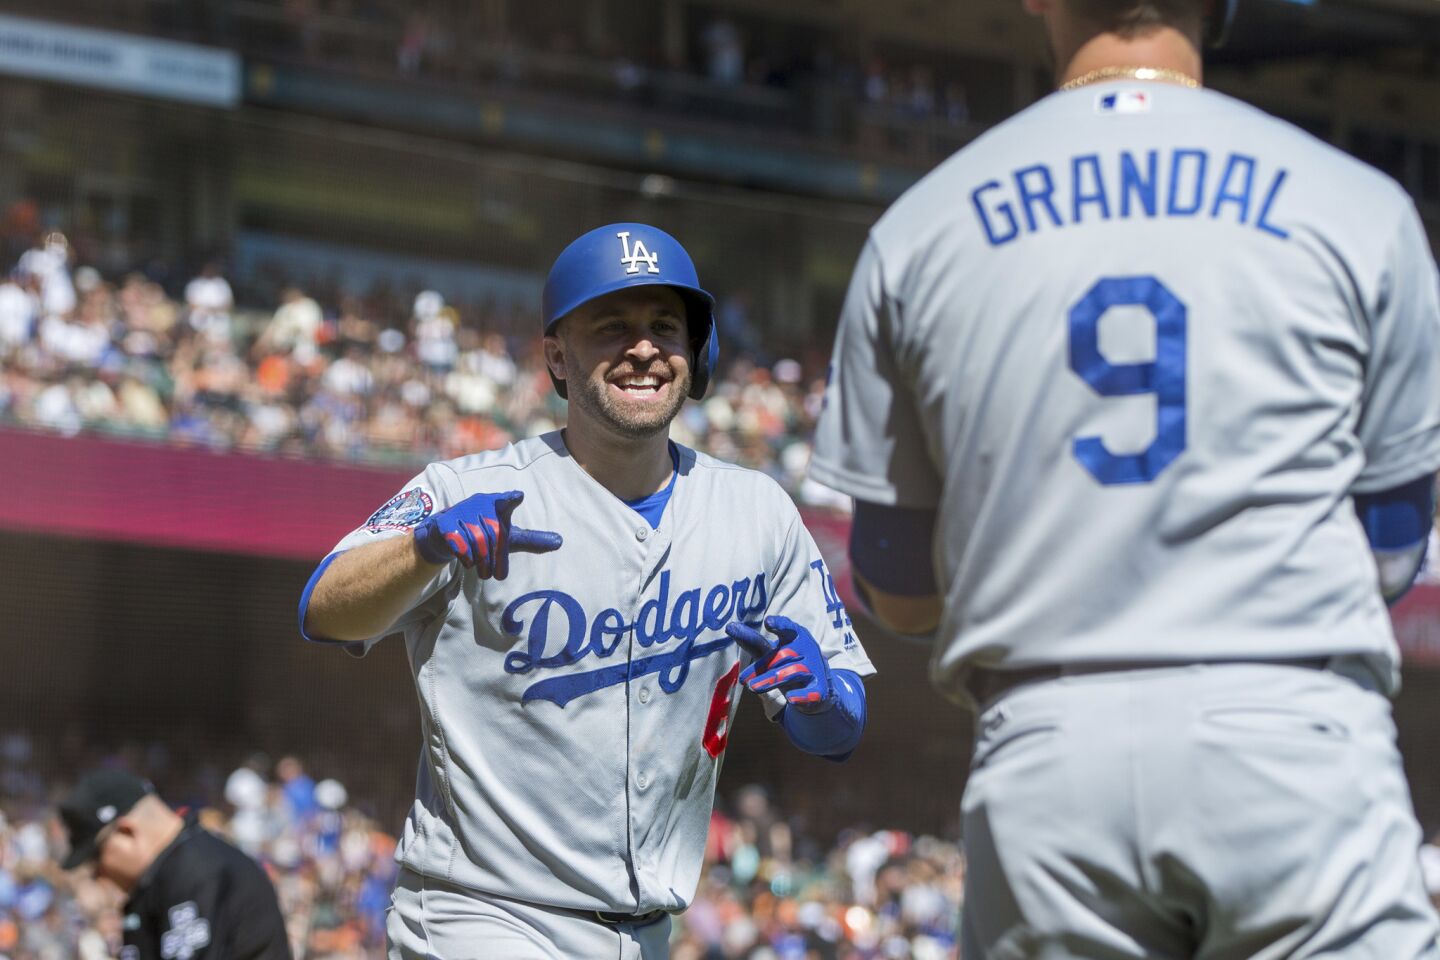 Los Angeles Dodgers Brian Dozier, left, celebrates with catcher Yasmani Grandal after he hit a two-run homer against the San Francisco Giants in the third inning of a baseball game in San Francisco, Sunday, Sept. 30, 2018.